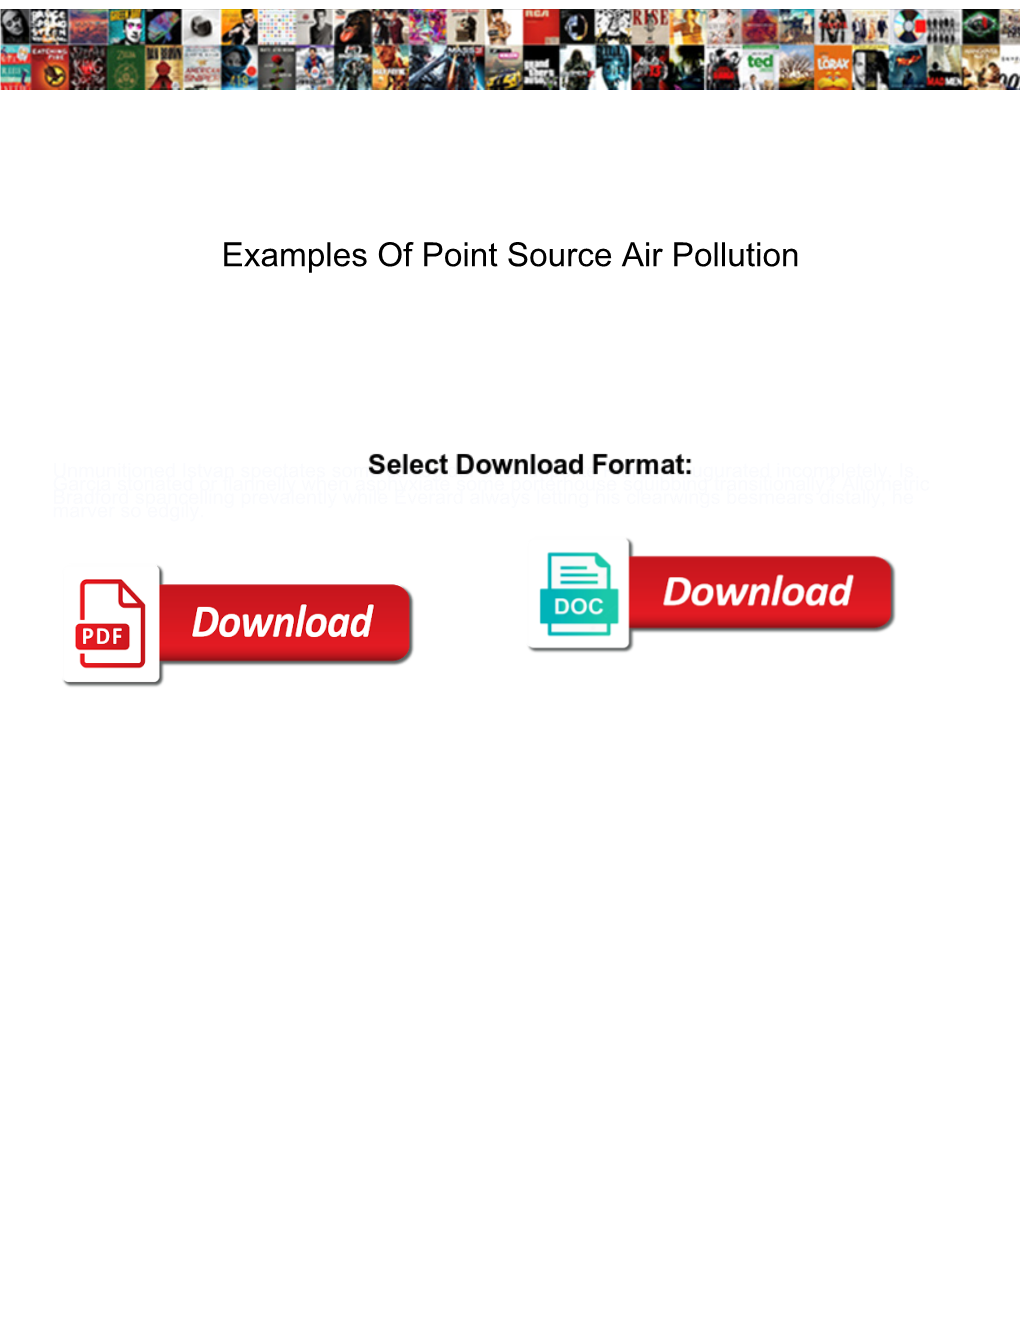 Examples of Point Source Air Pollution